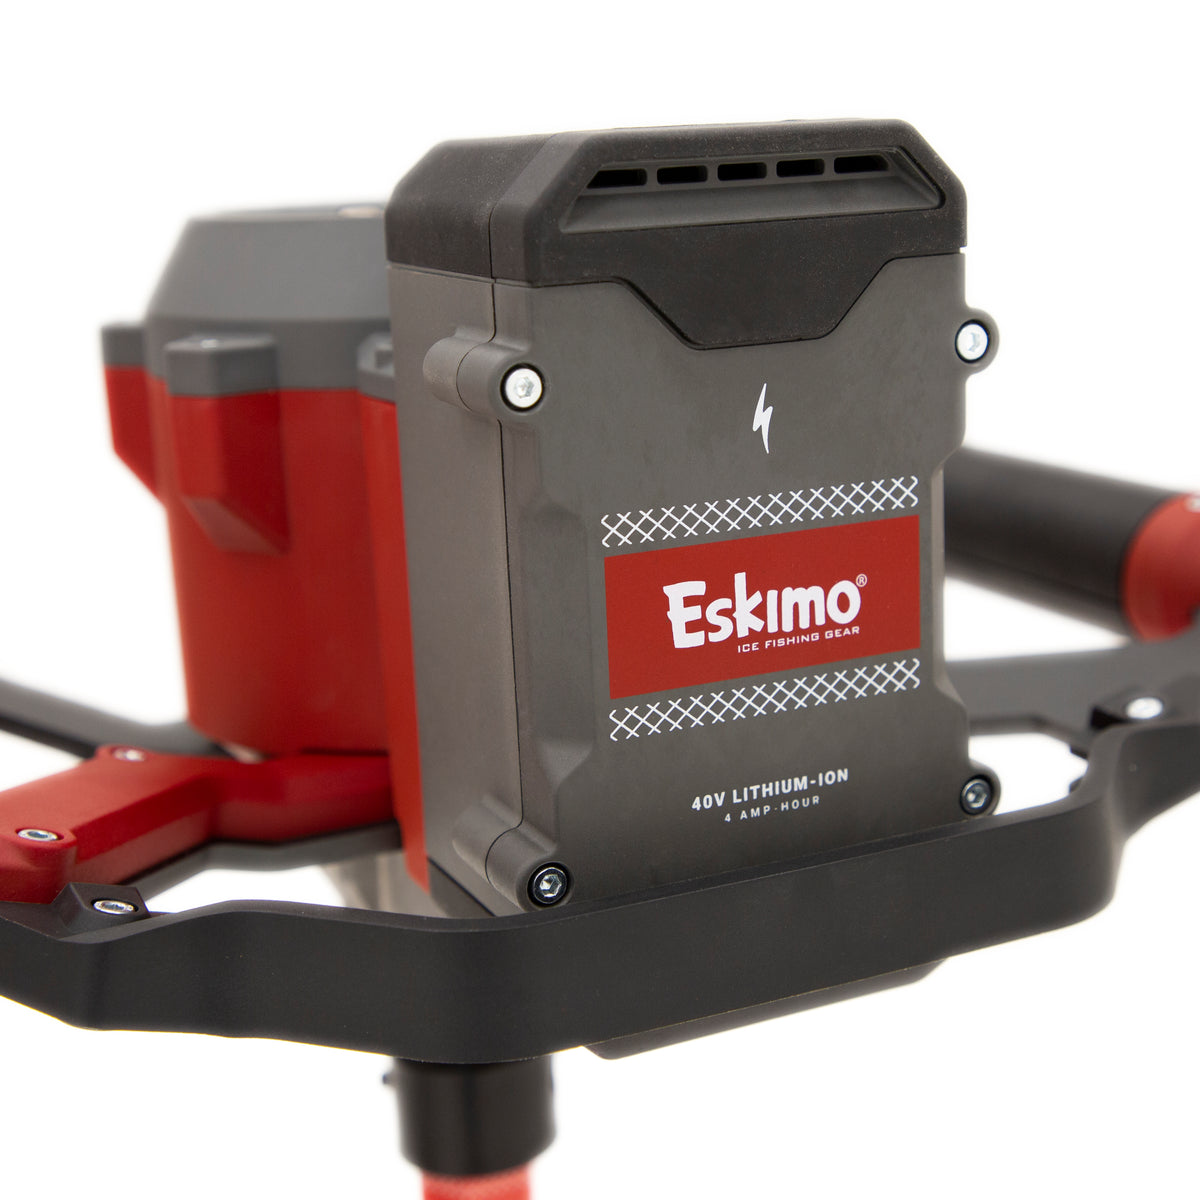 Eskimo E40 8" Composite Electric Auger 40v with FREE 2nd BATTERY